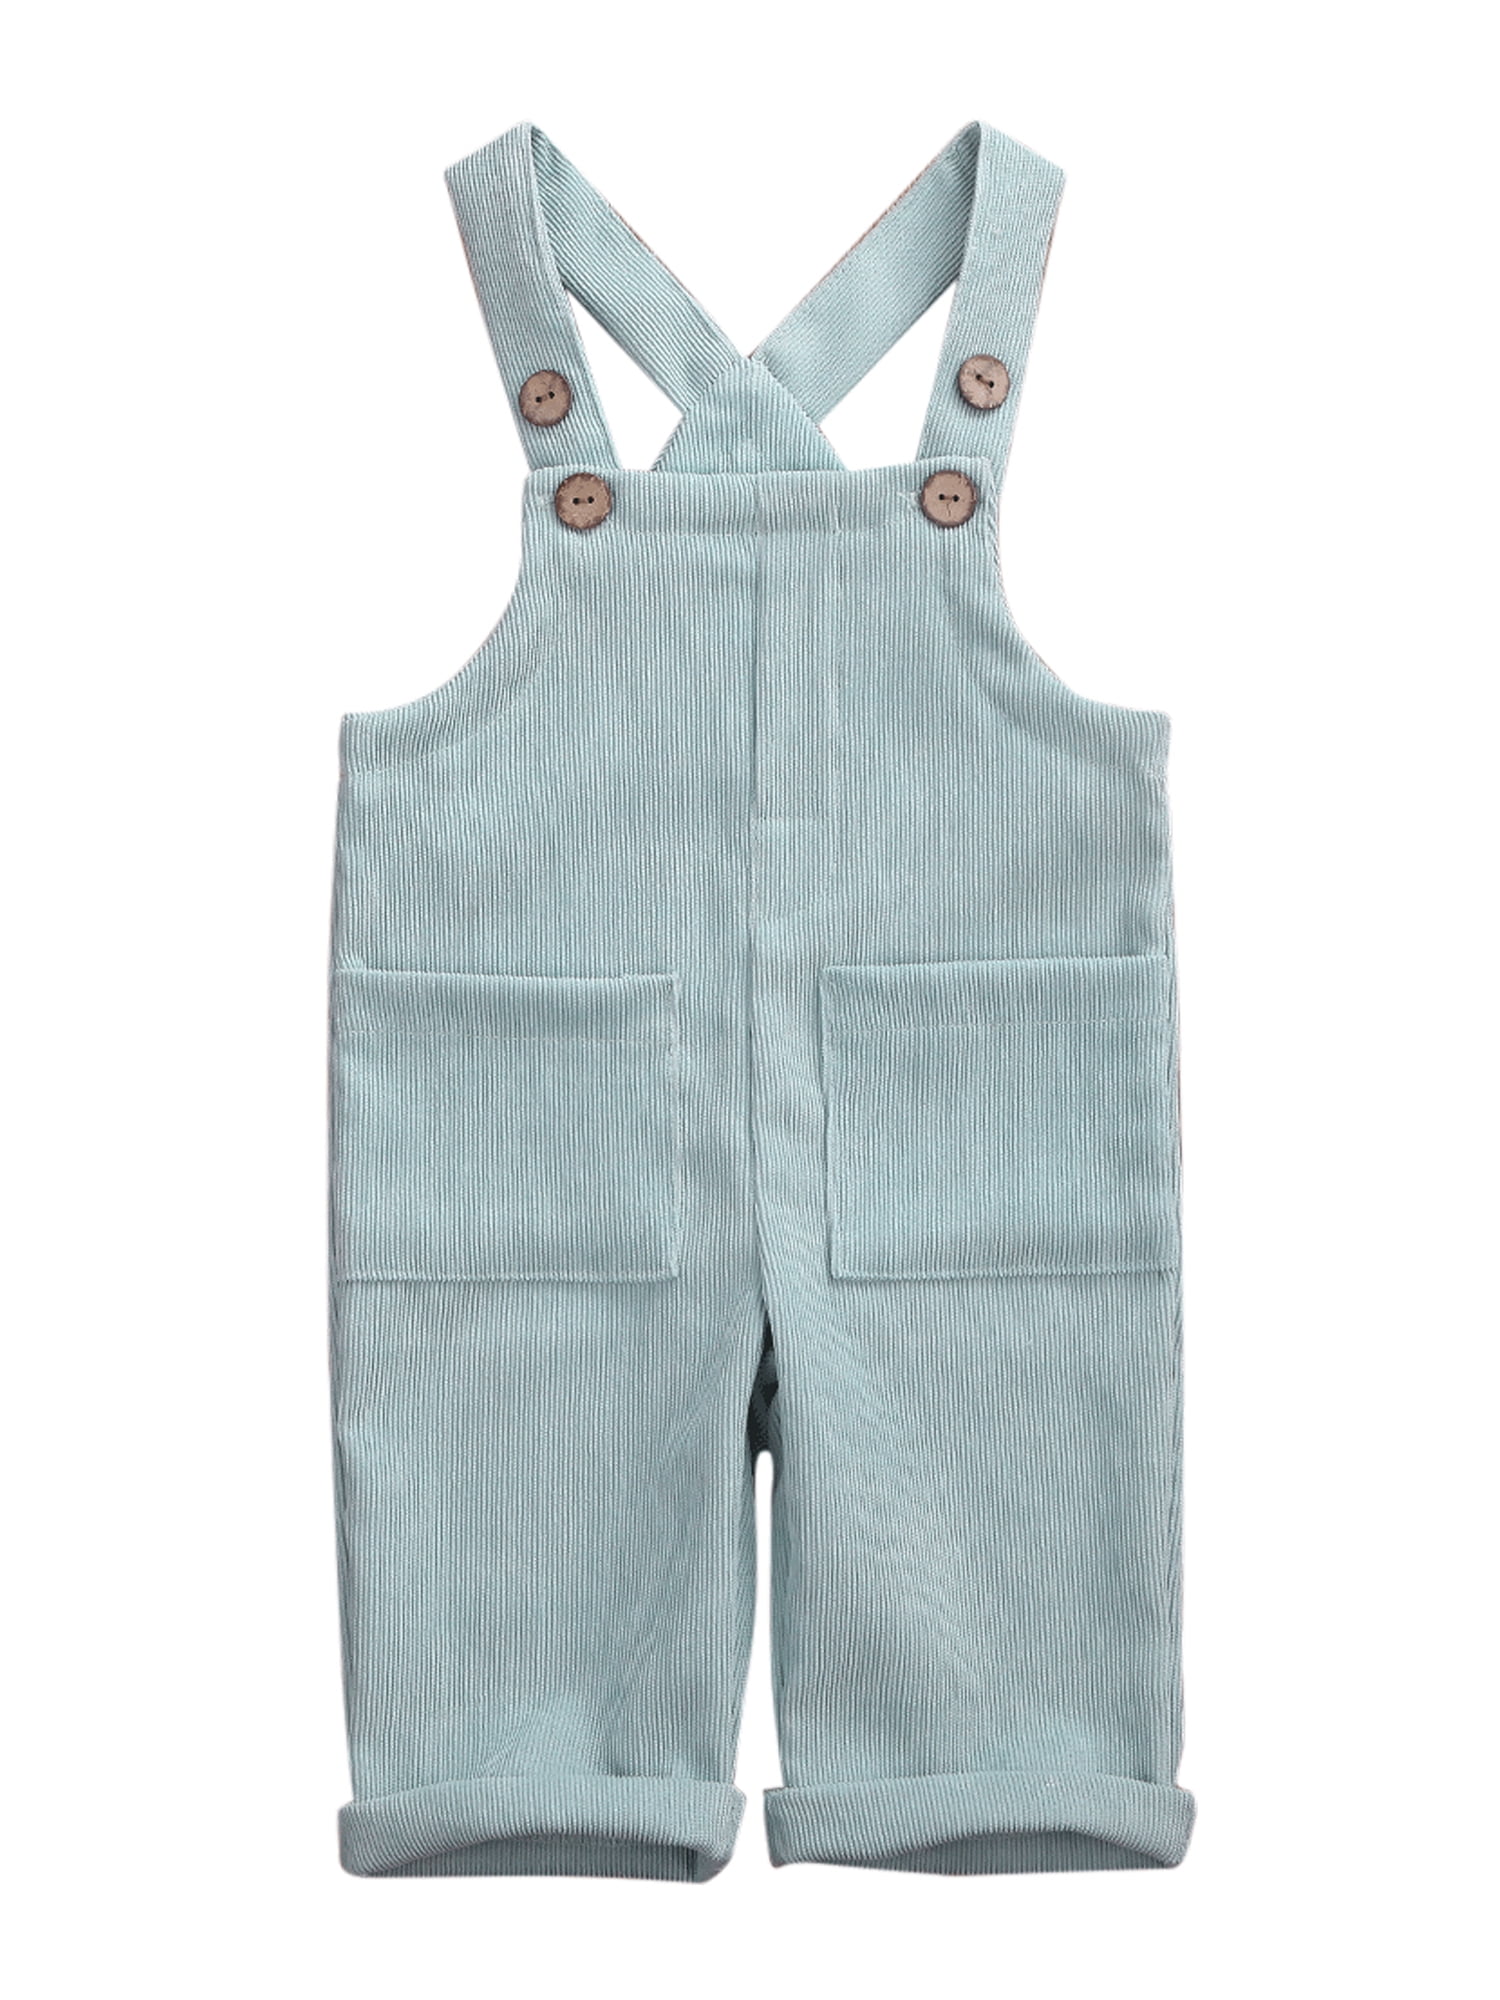 Girls Dungarees Knitted Overalls Strap Jumpsuit  Red/Blue Age 18M  to 4yrs 